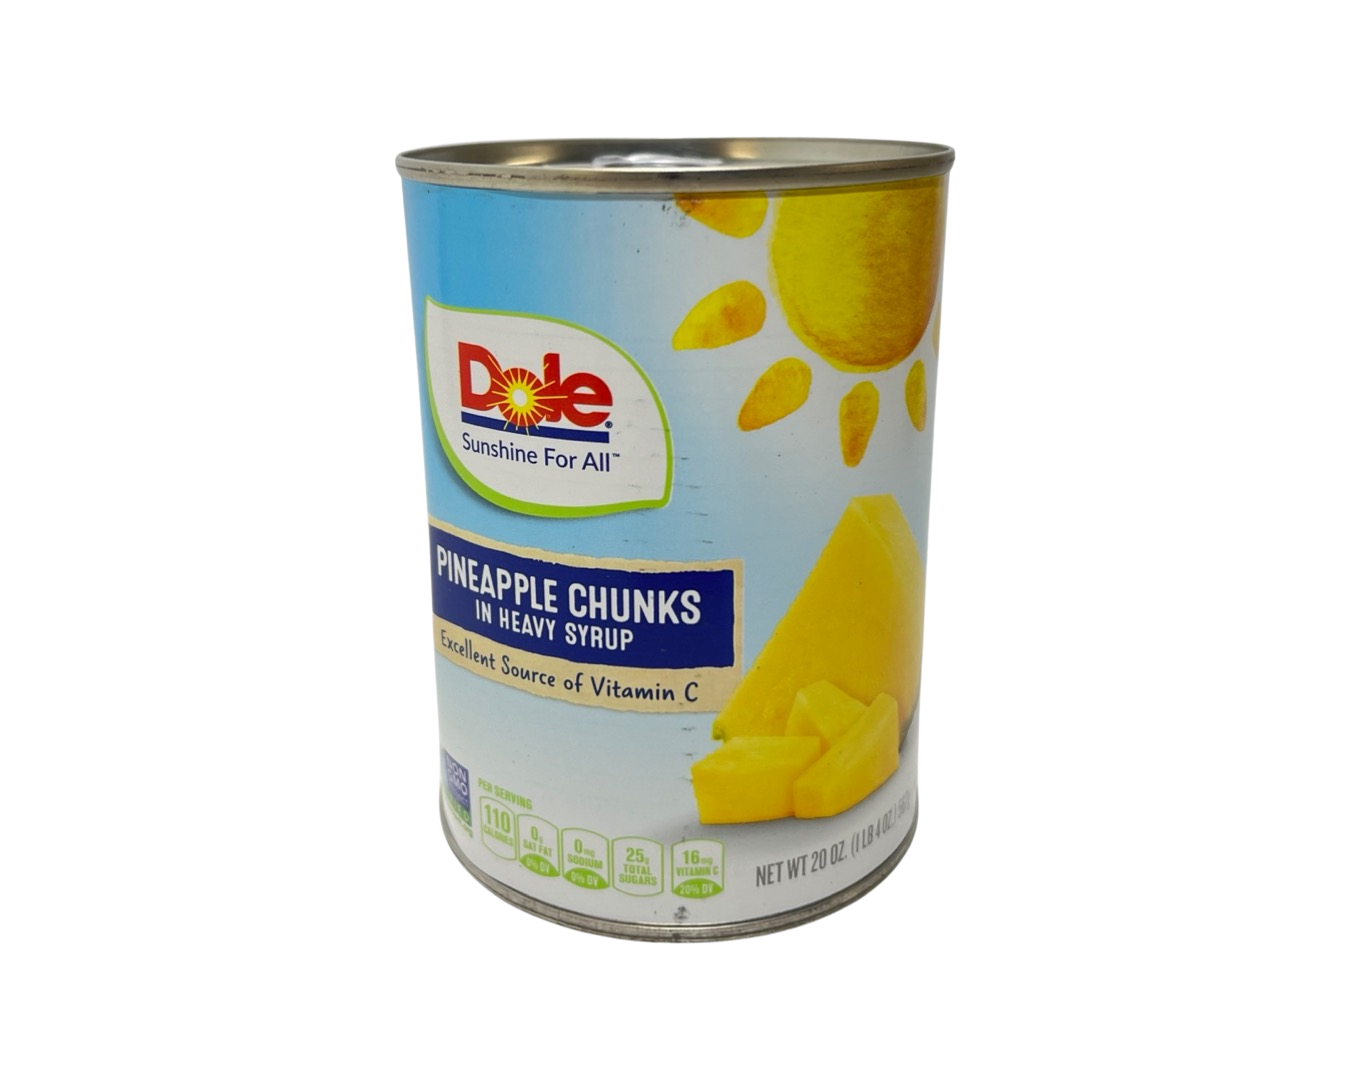 Dole Pineapple Chunks in Heavy Syrup 567g